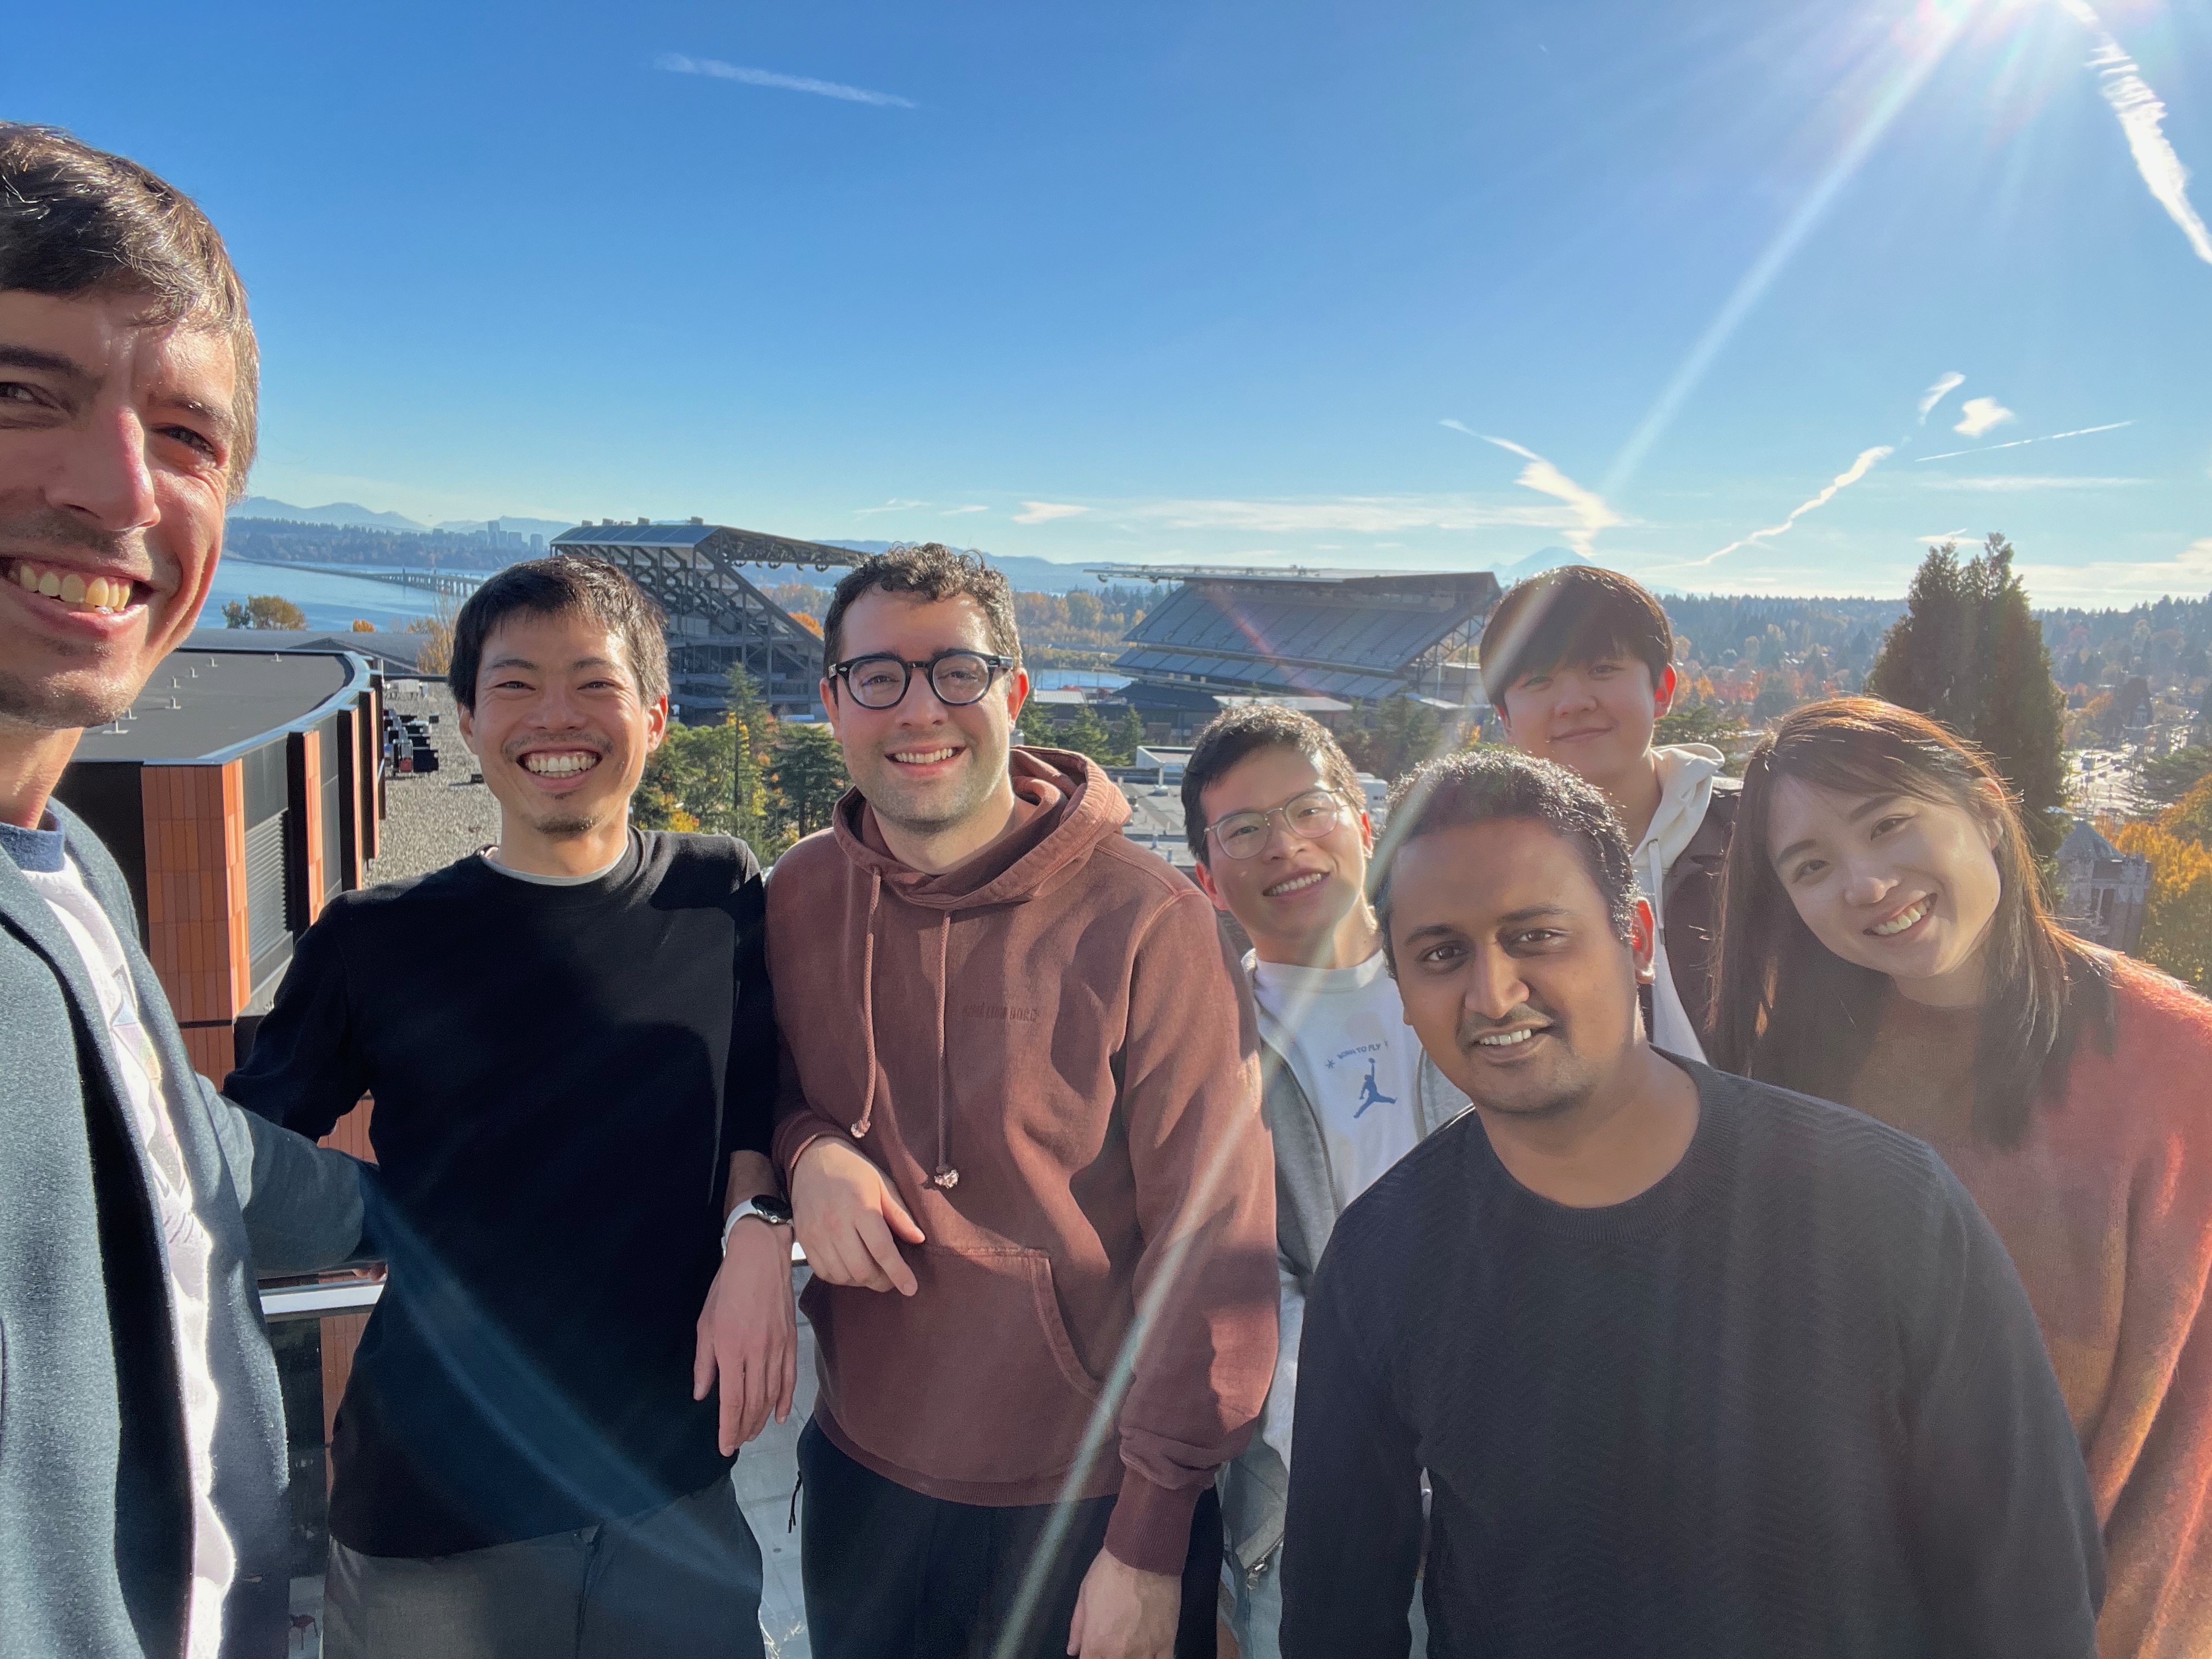 Makeability Lab takes a selfie with Ryo with the Cascades and Lake Washington in the background